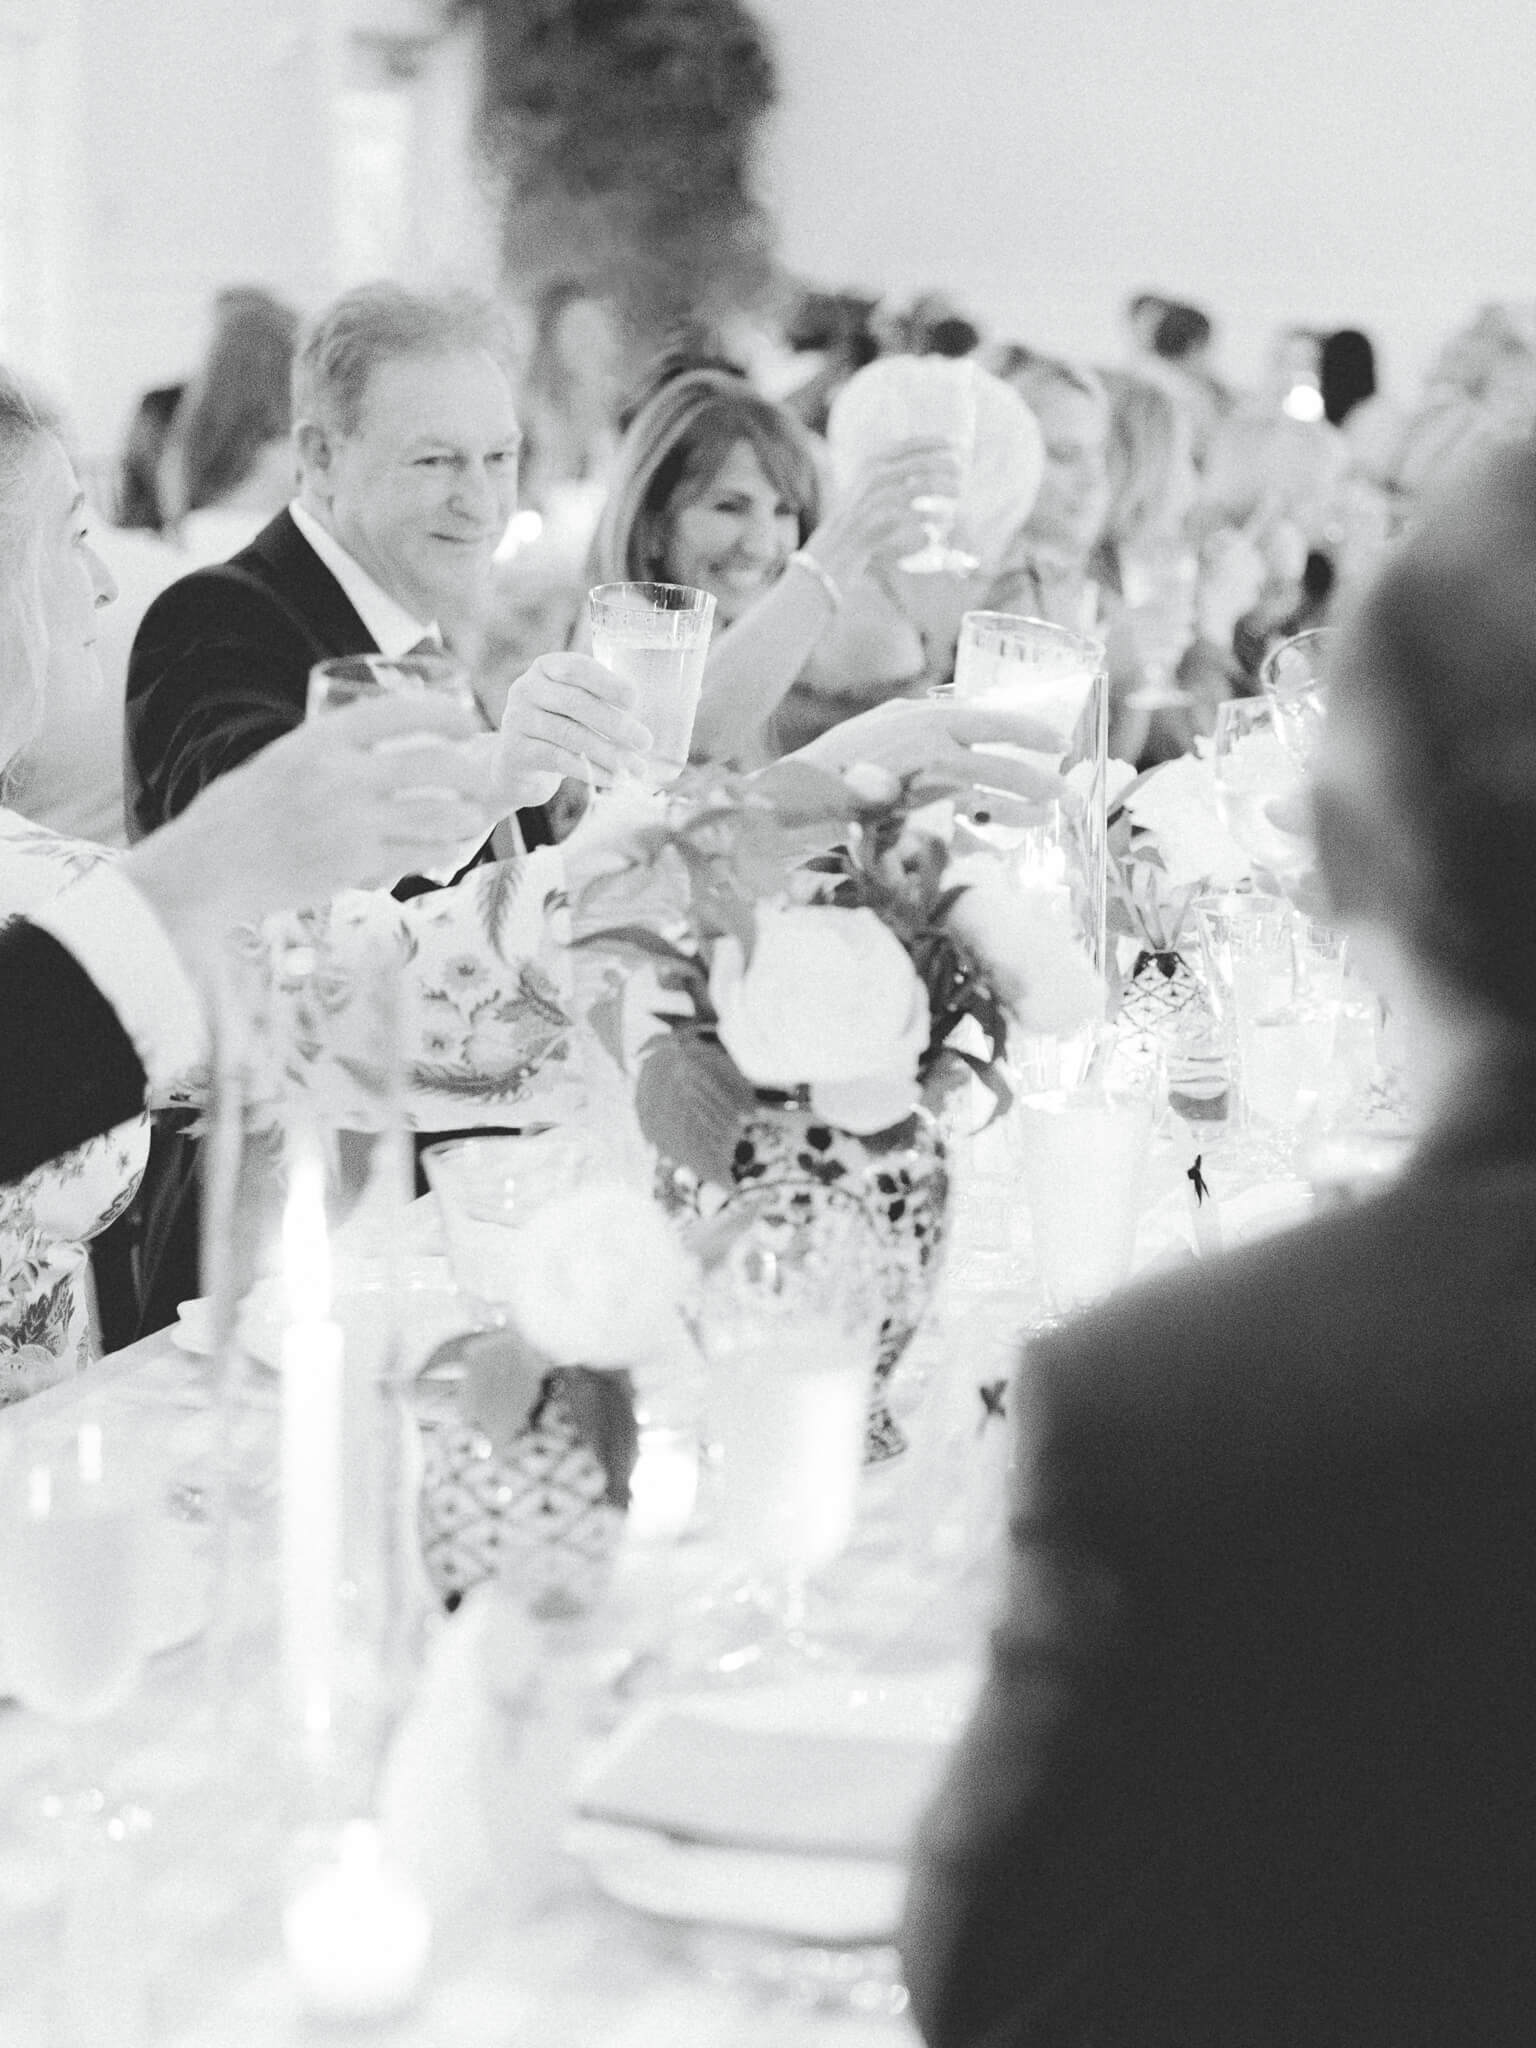 Black and white image of guests toasting during a candlelit wedding reception